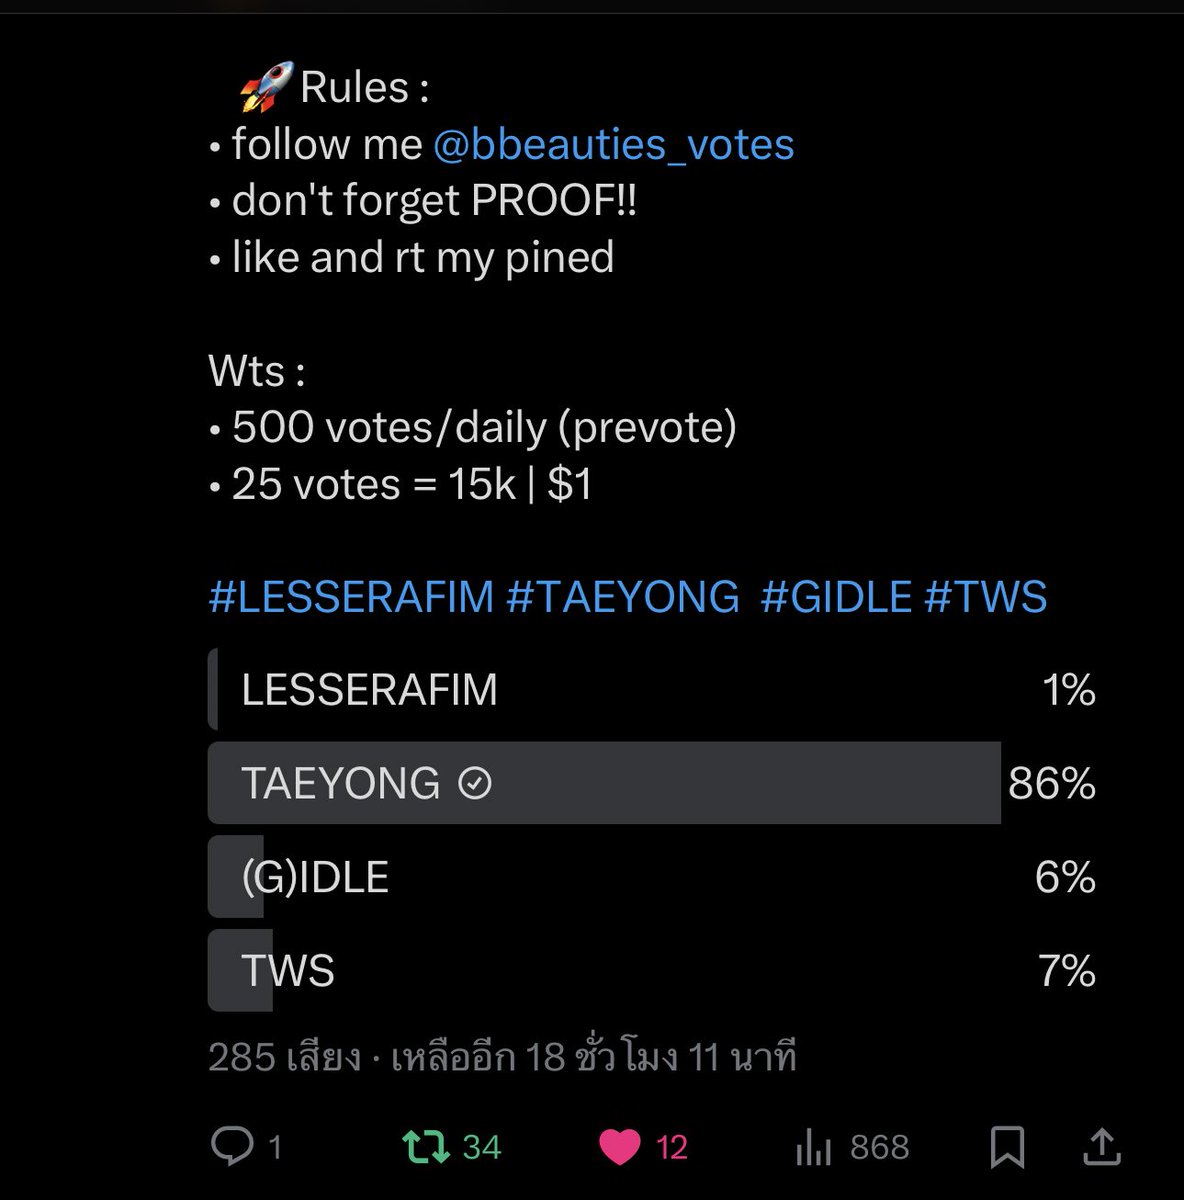 @bbeauties_votes @Stynop3 For #TAEYONG